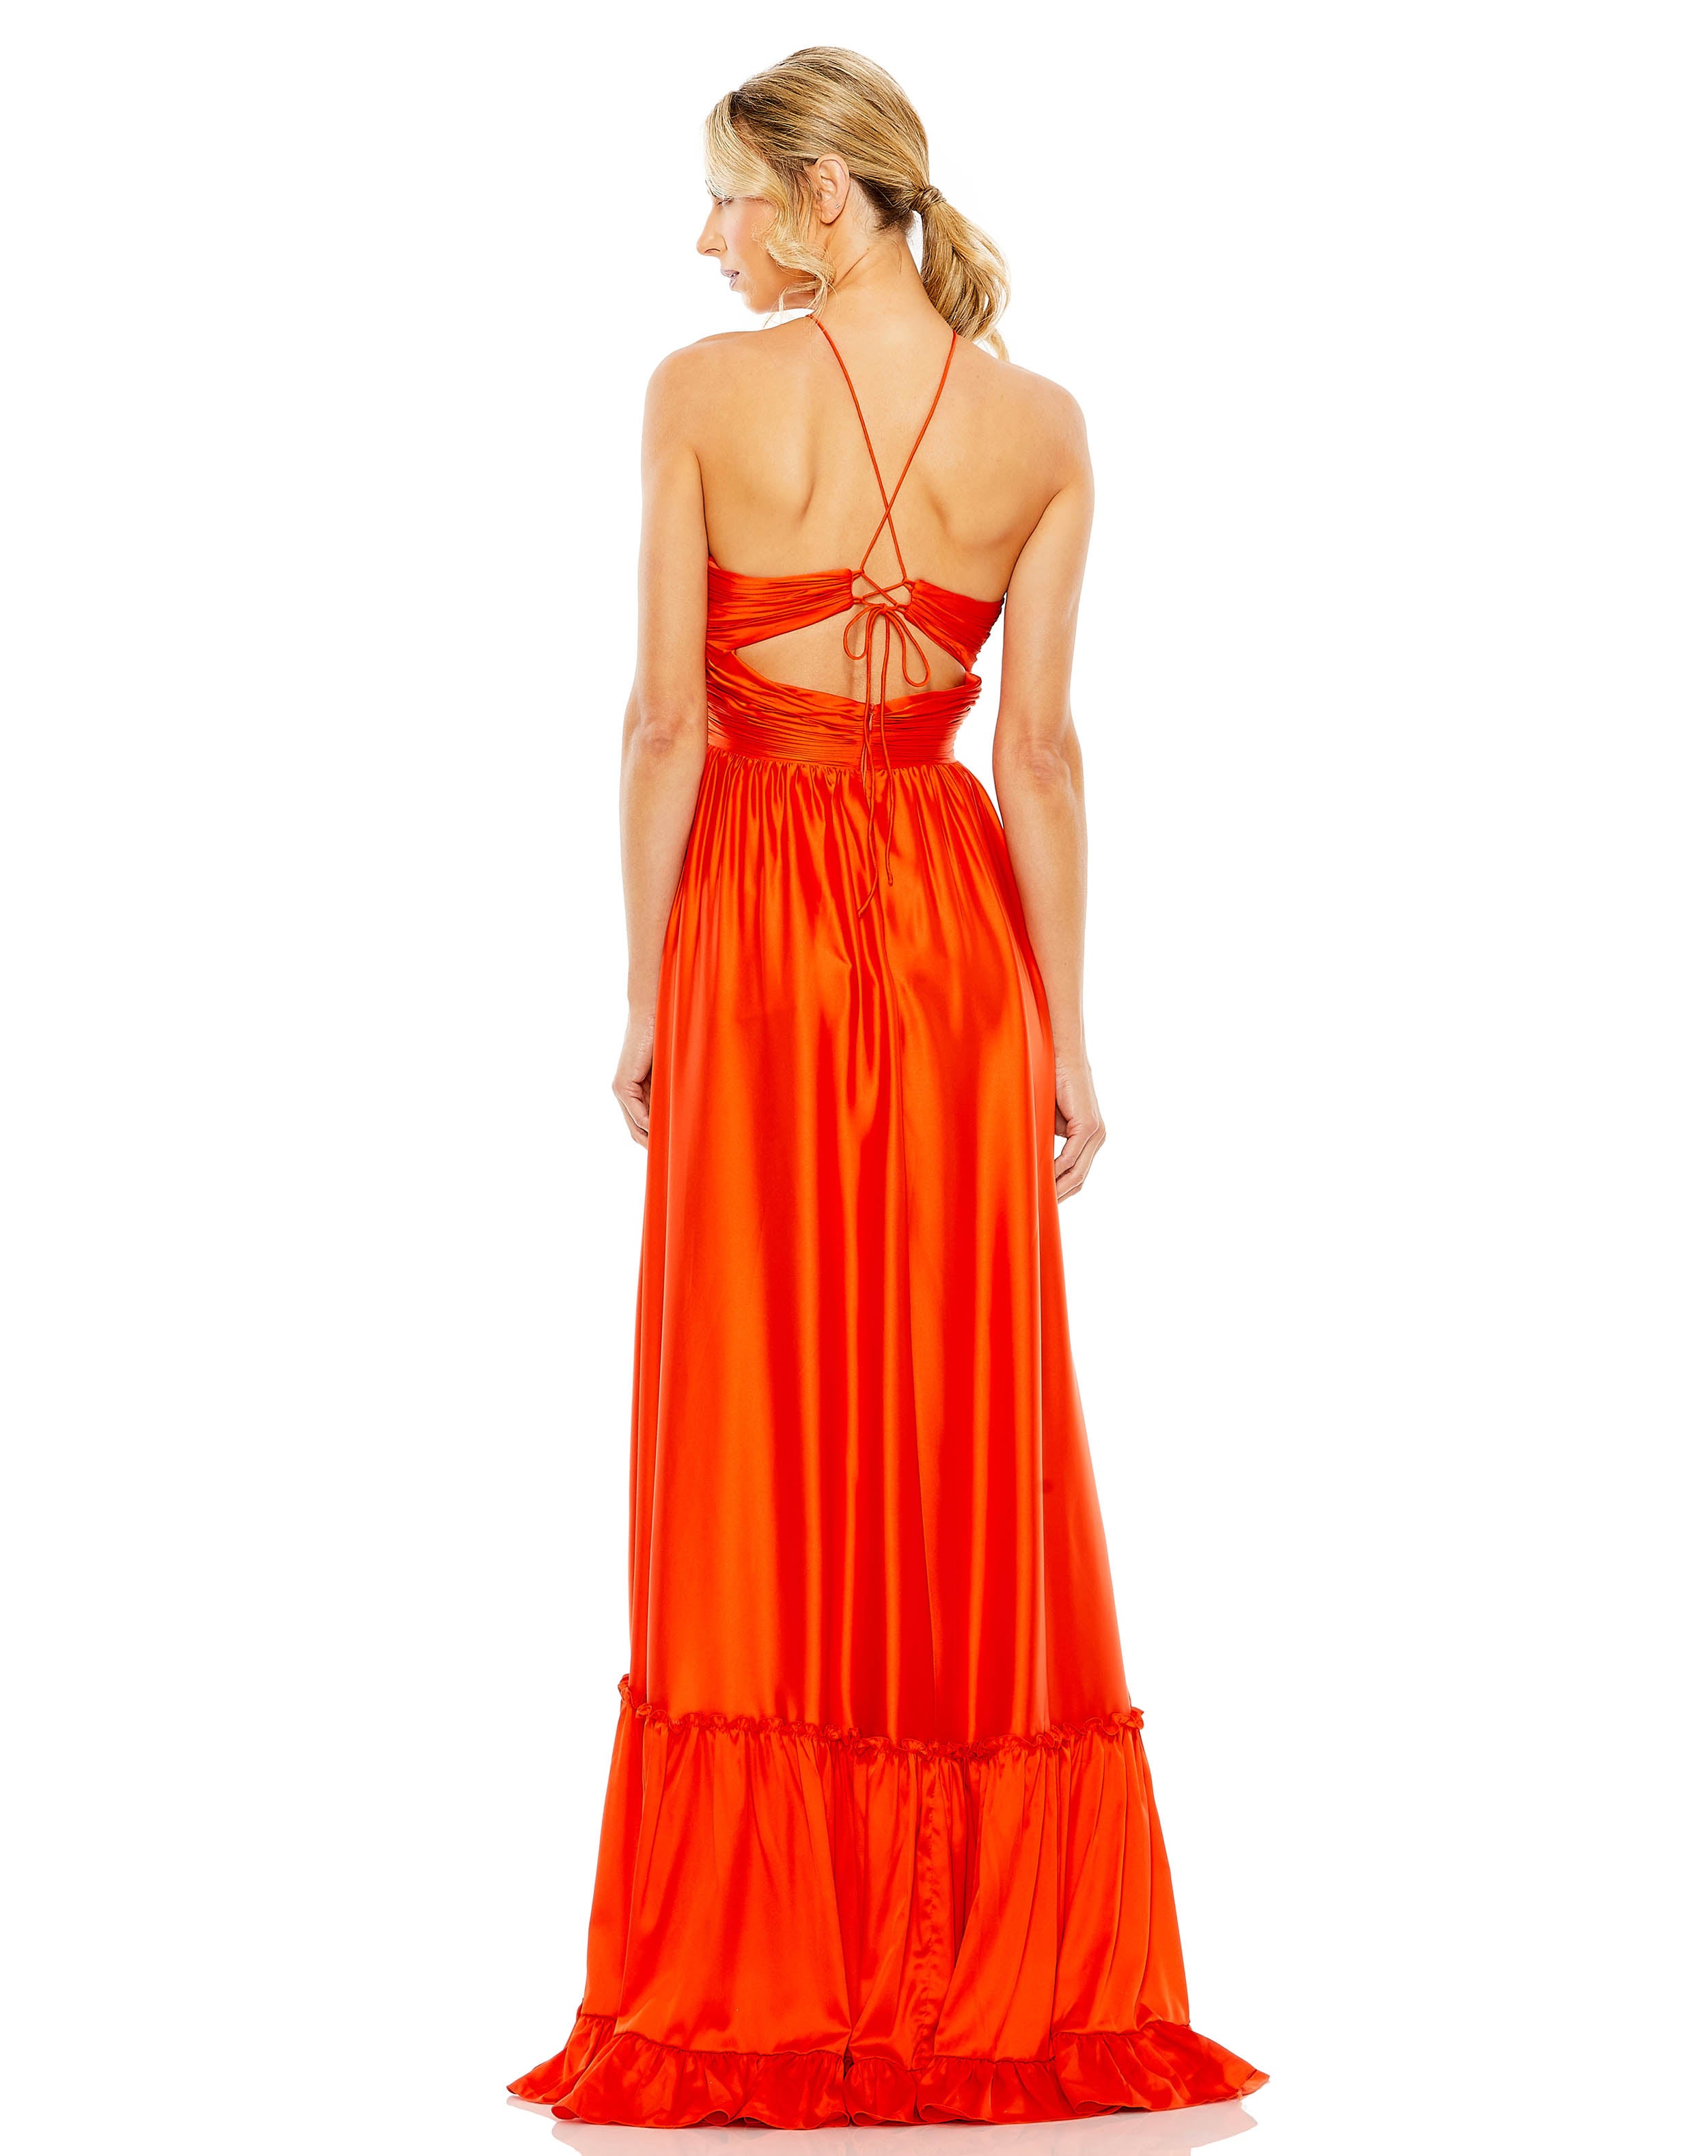 Ruched Tiered Criss Cross Spaghetti Strap Gown